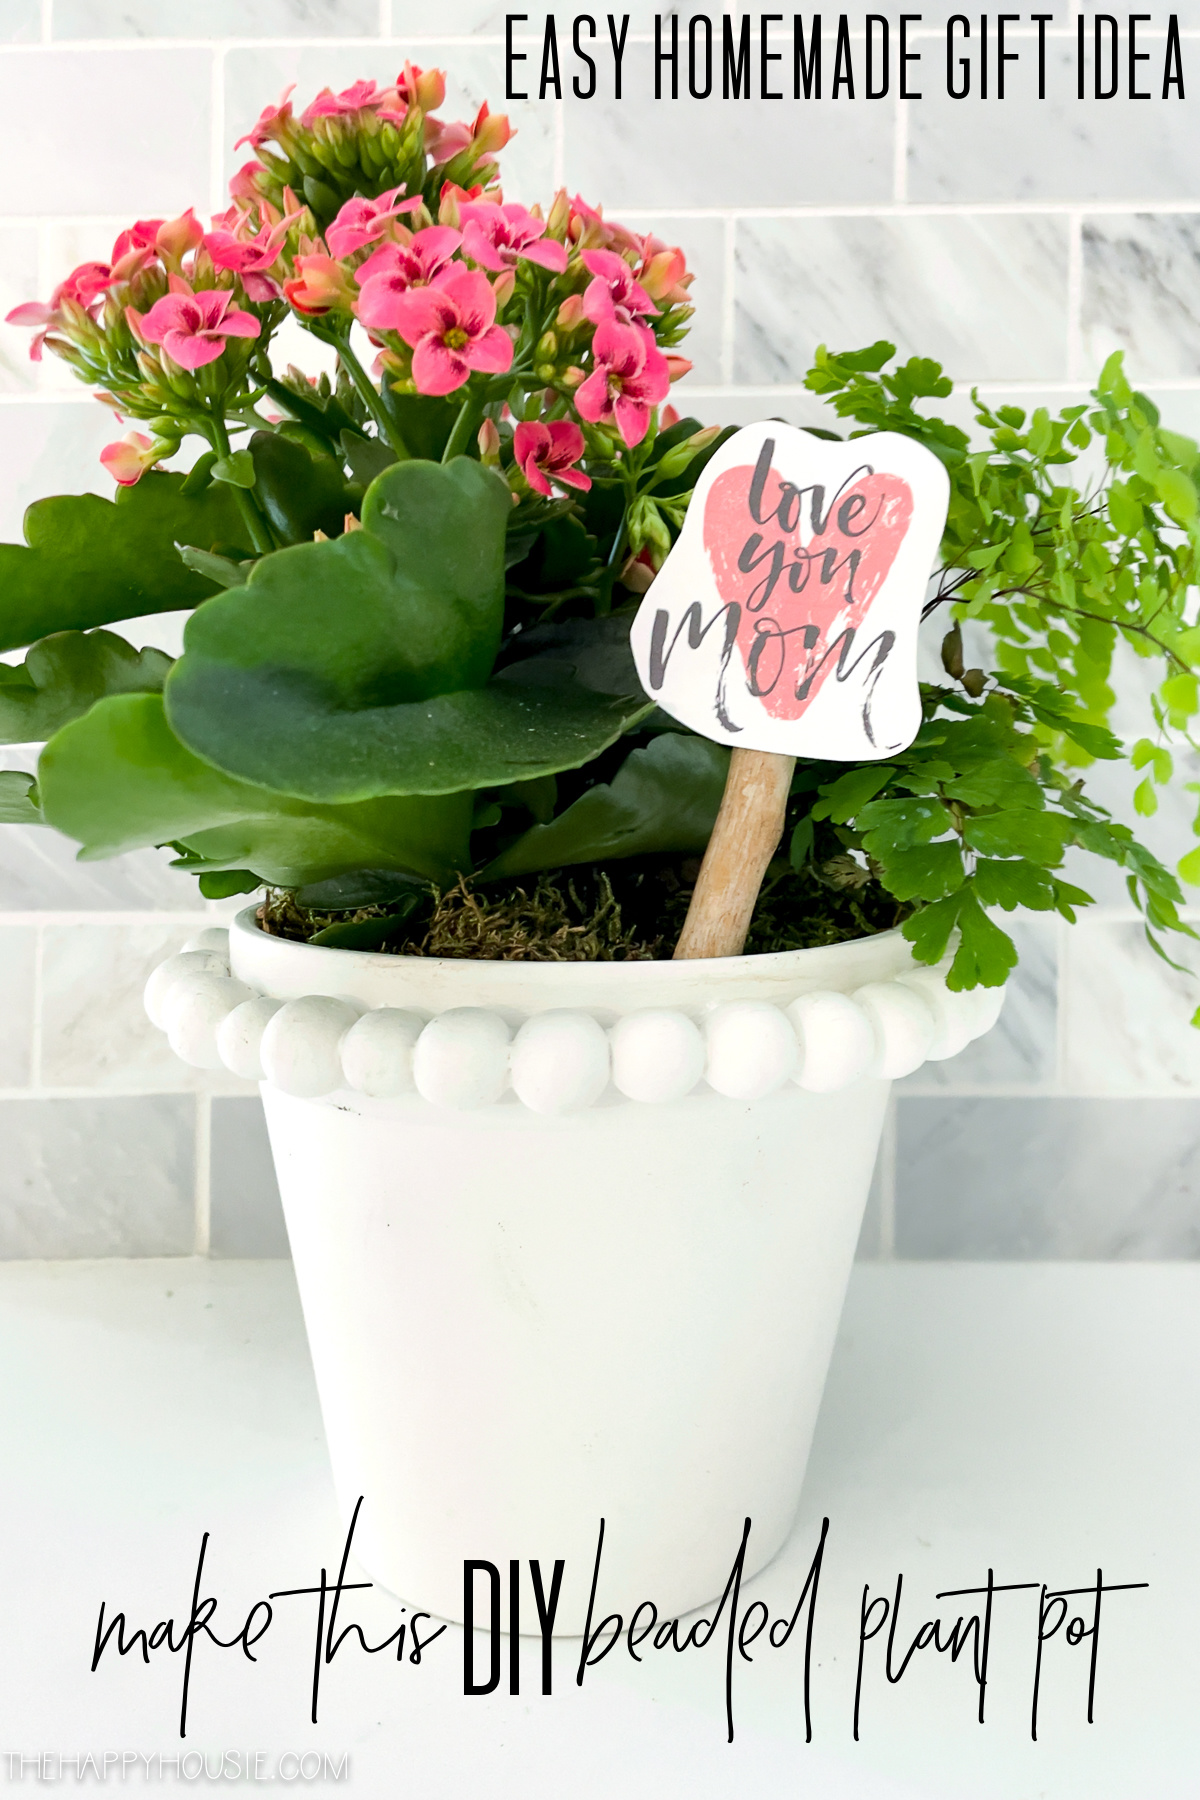 DIY Strawberry Pot & Plant Gift Idea : 6 Steps (with Pictures) -  Instructables